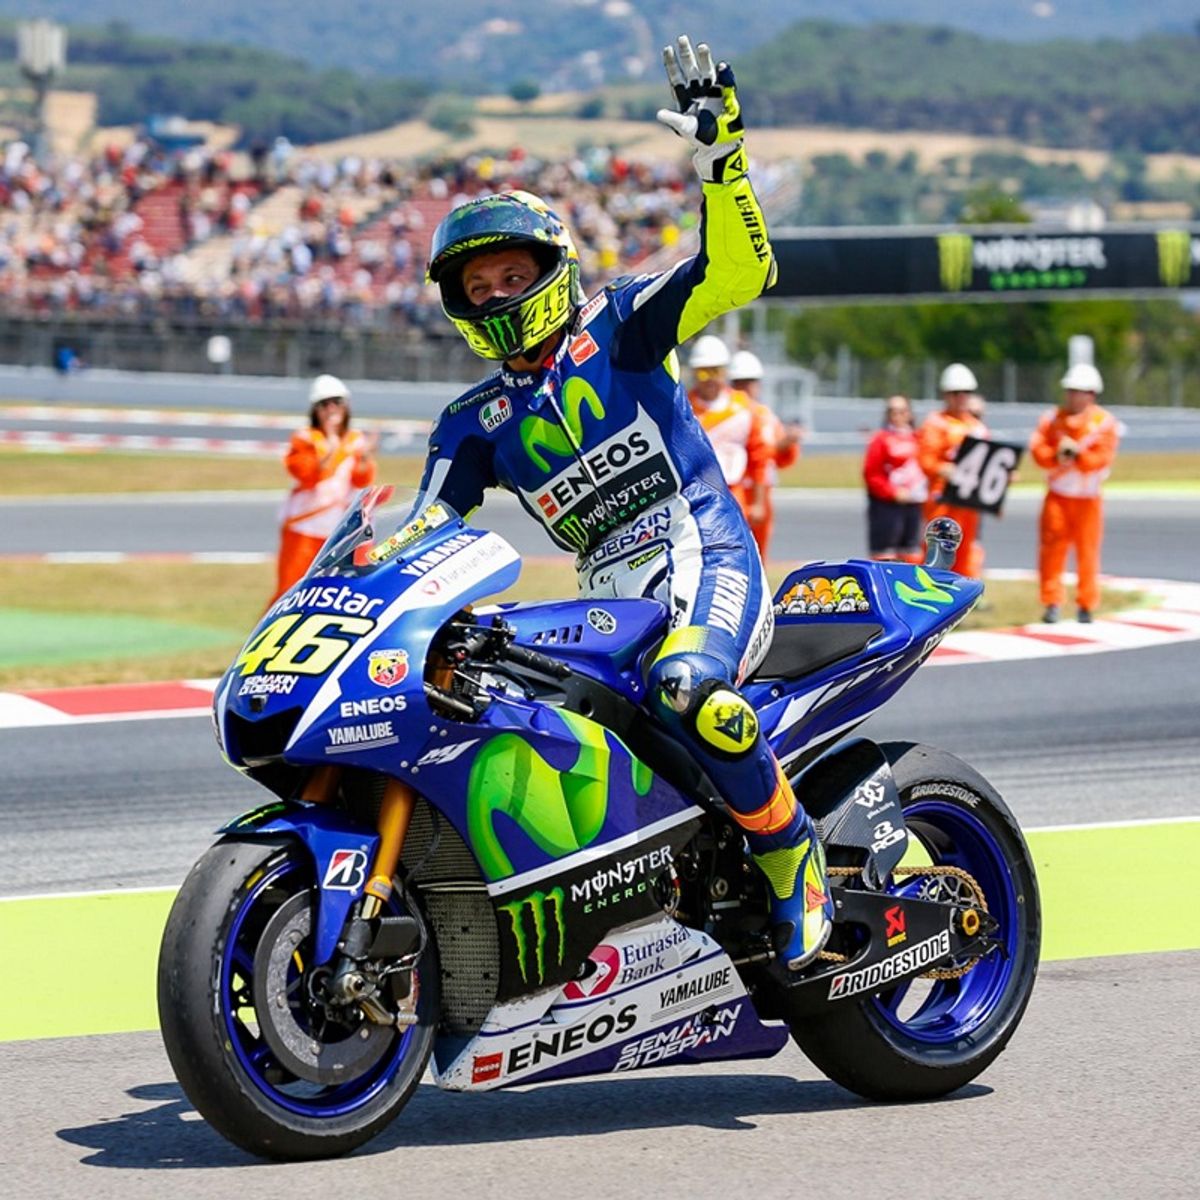 Grand Prix bikes of Valentino Rossi that defined his career